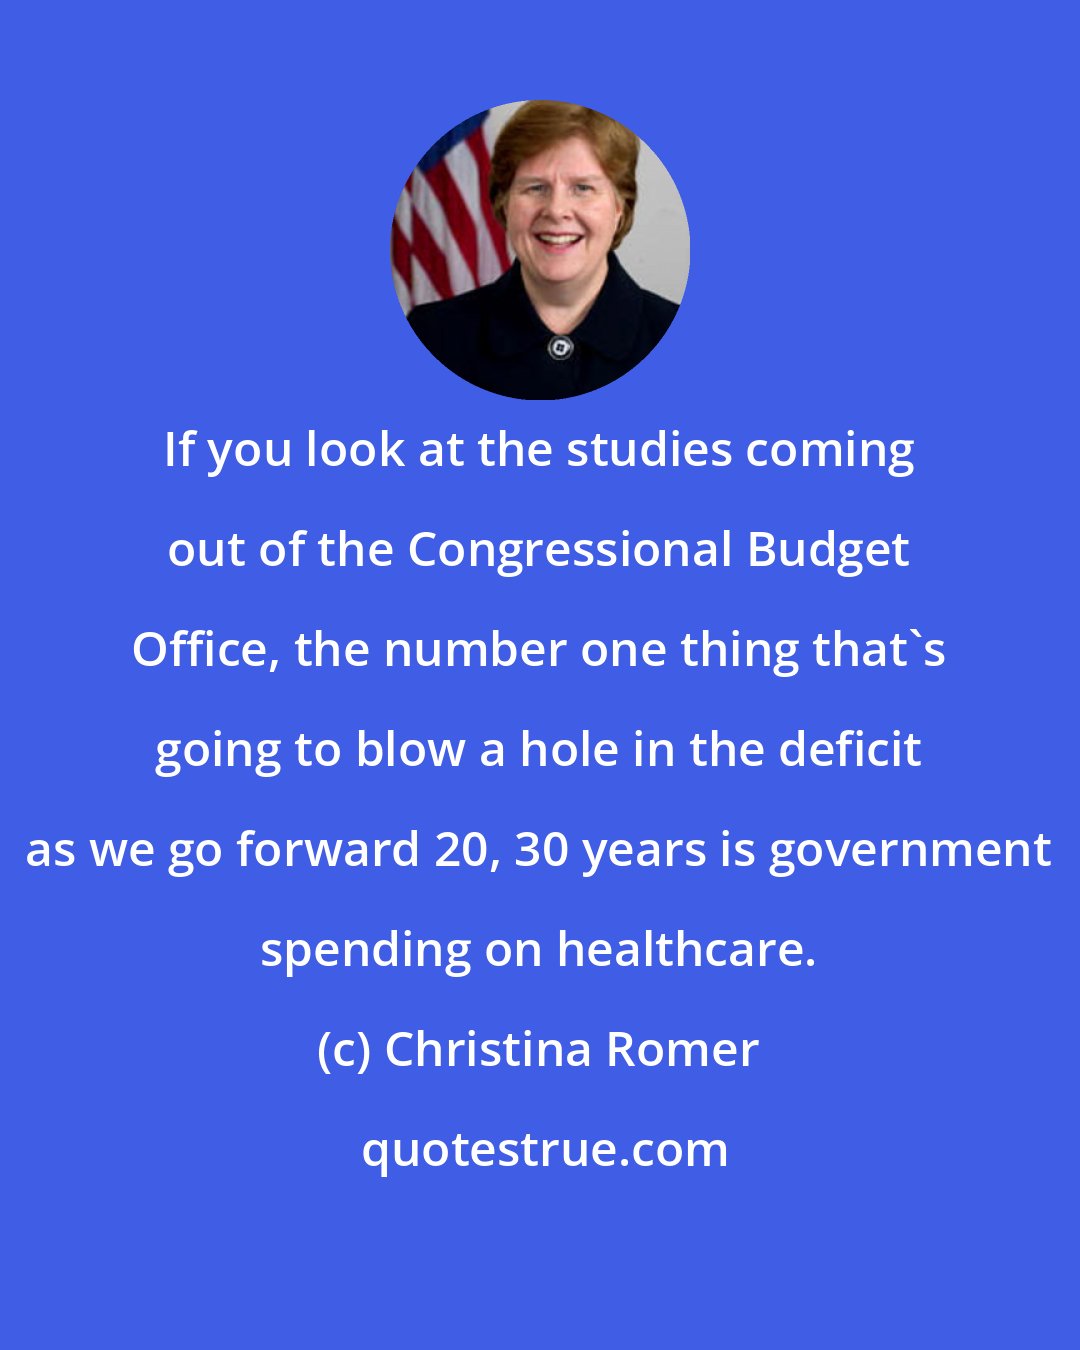 Christina Romer: If you look at the studies coming out of the Congressional Budget Office, the number one thing that's going to blow a hole in the deficit as we go forward 20, 30 years is government spending on healthcare.